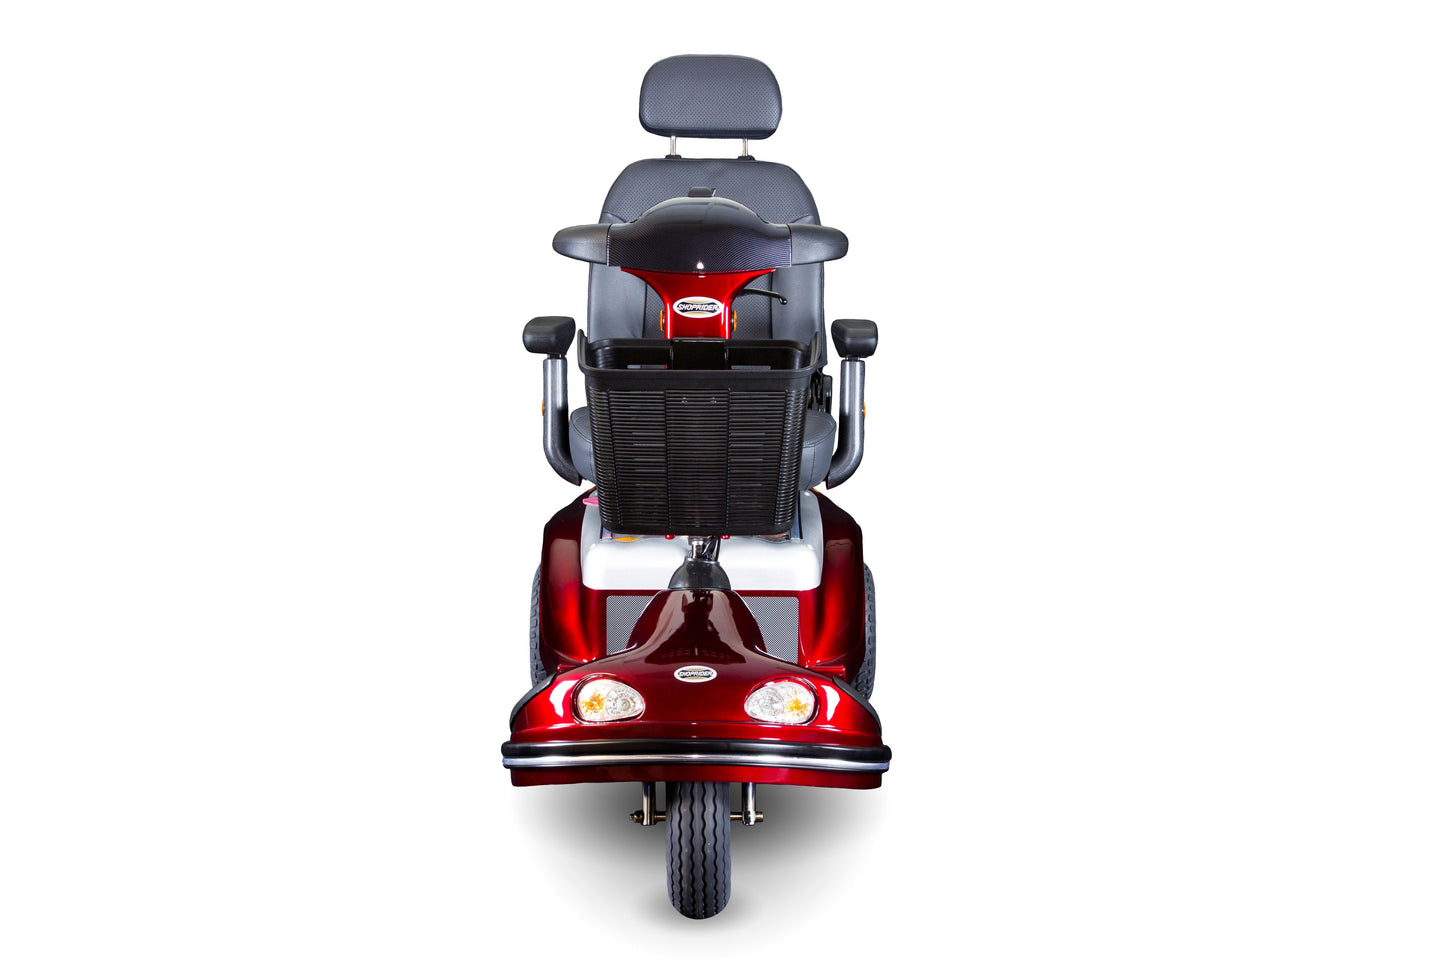 Shoprider Enduro XL3 Heavy Duty 3-Wheel Long Distance Mobility Scooter - Swivel Chair, Full Suspension, 500lbs Weight Capacity